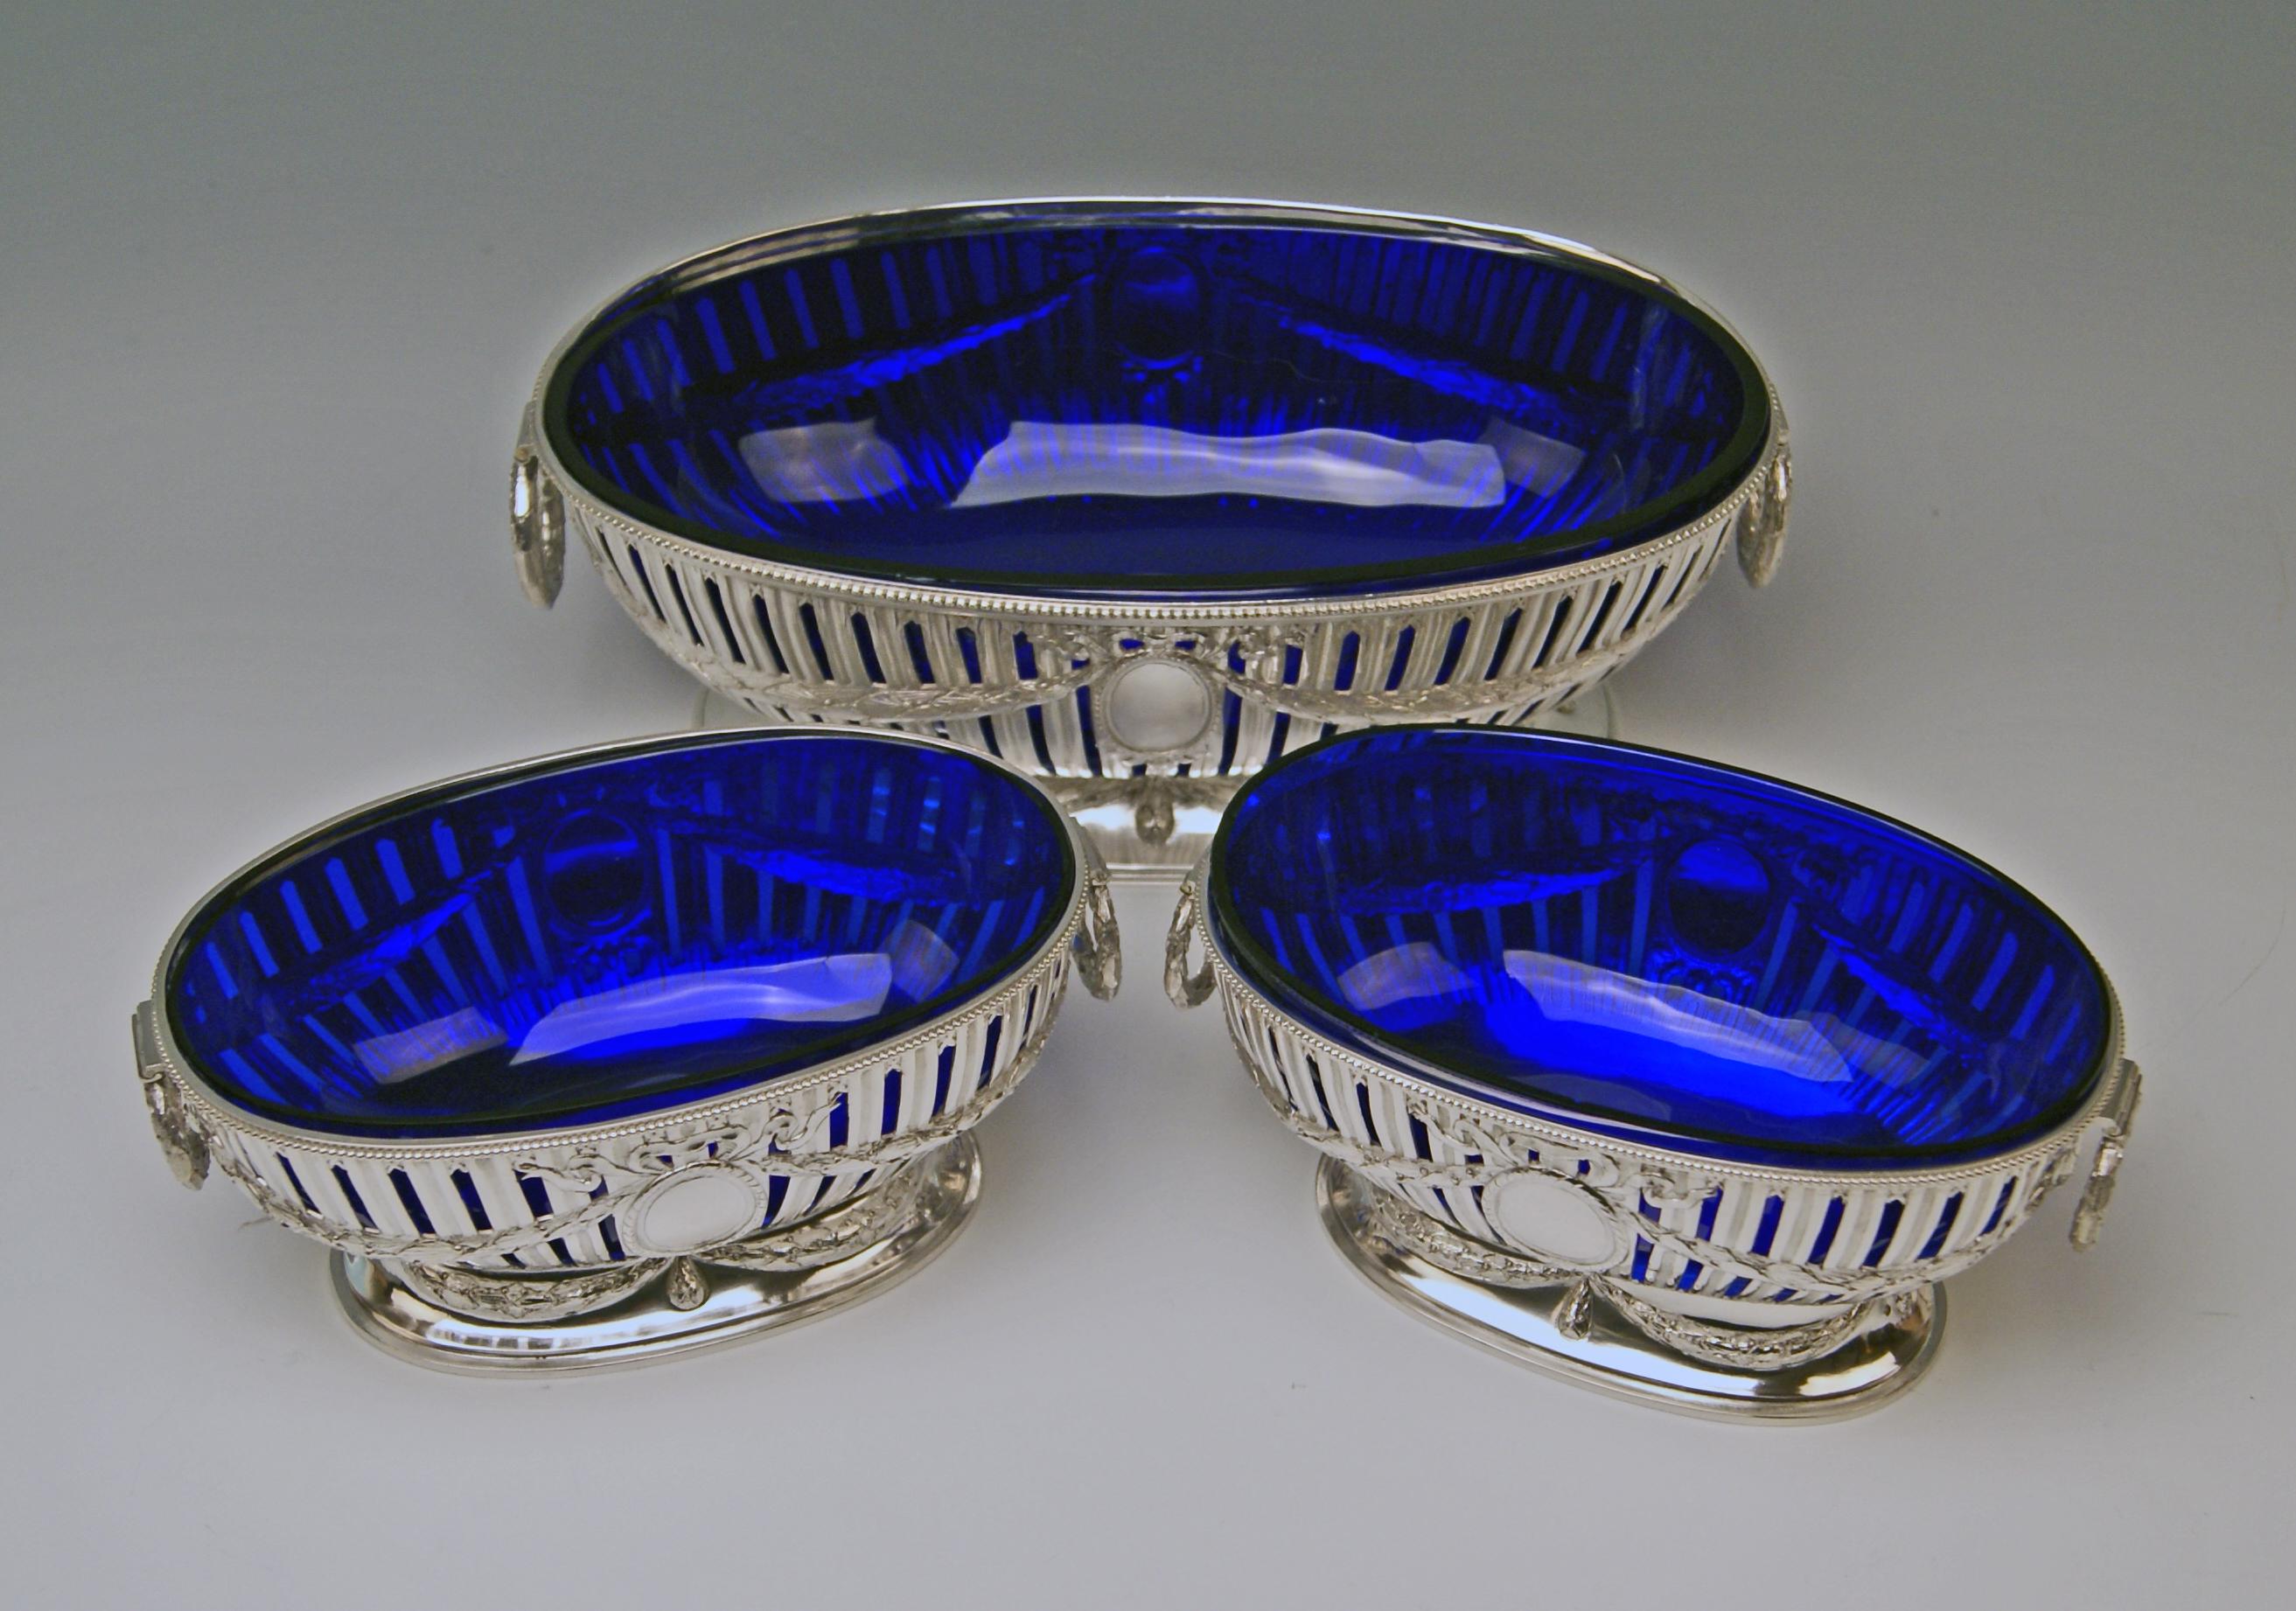 Silver set of three oblong bowls / centrepieces with original cobalt blue glass liners.
Art Nouveau / made circa 1900-1905

Stunningly manufactured set of three silver bowls: One of large dimension, the other two of smaller size / they have